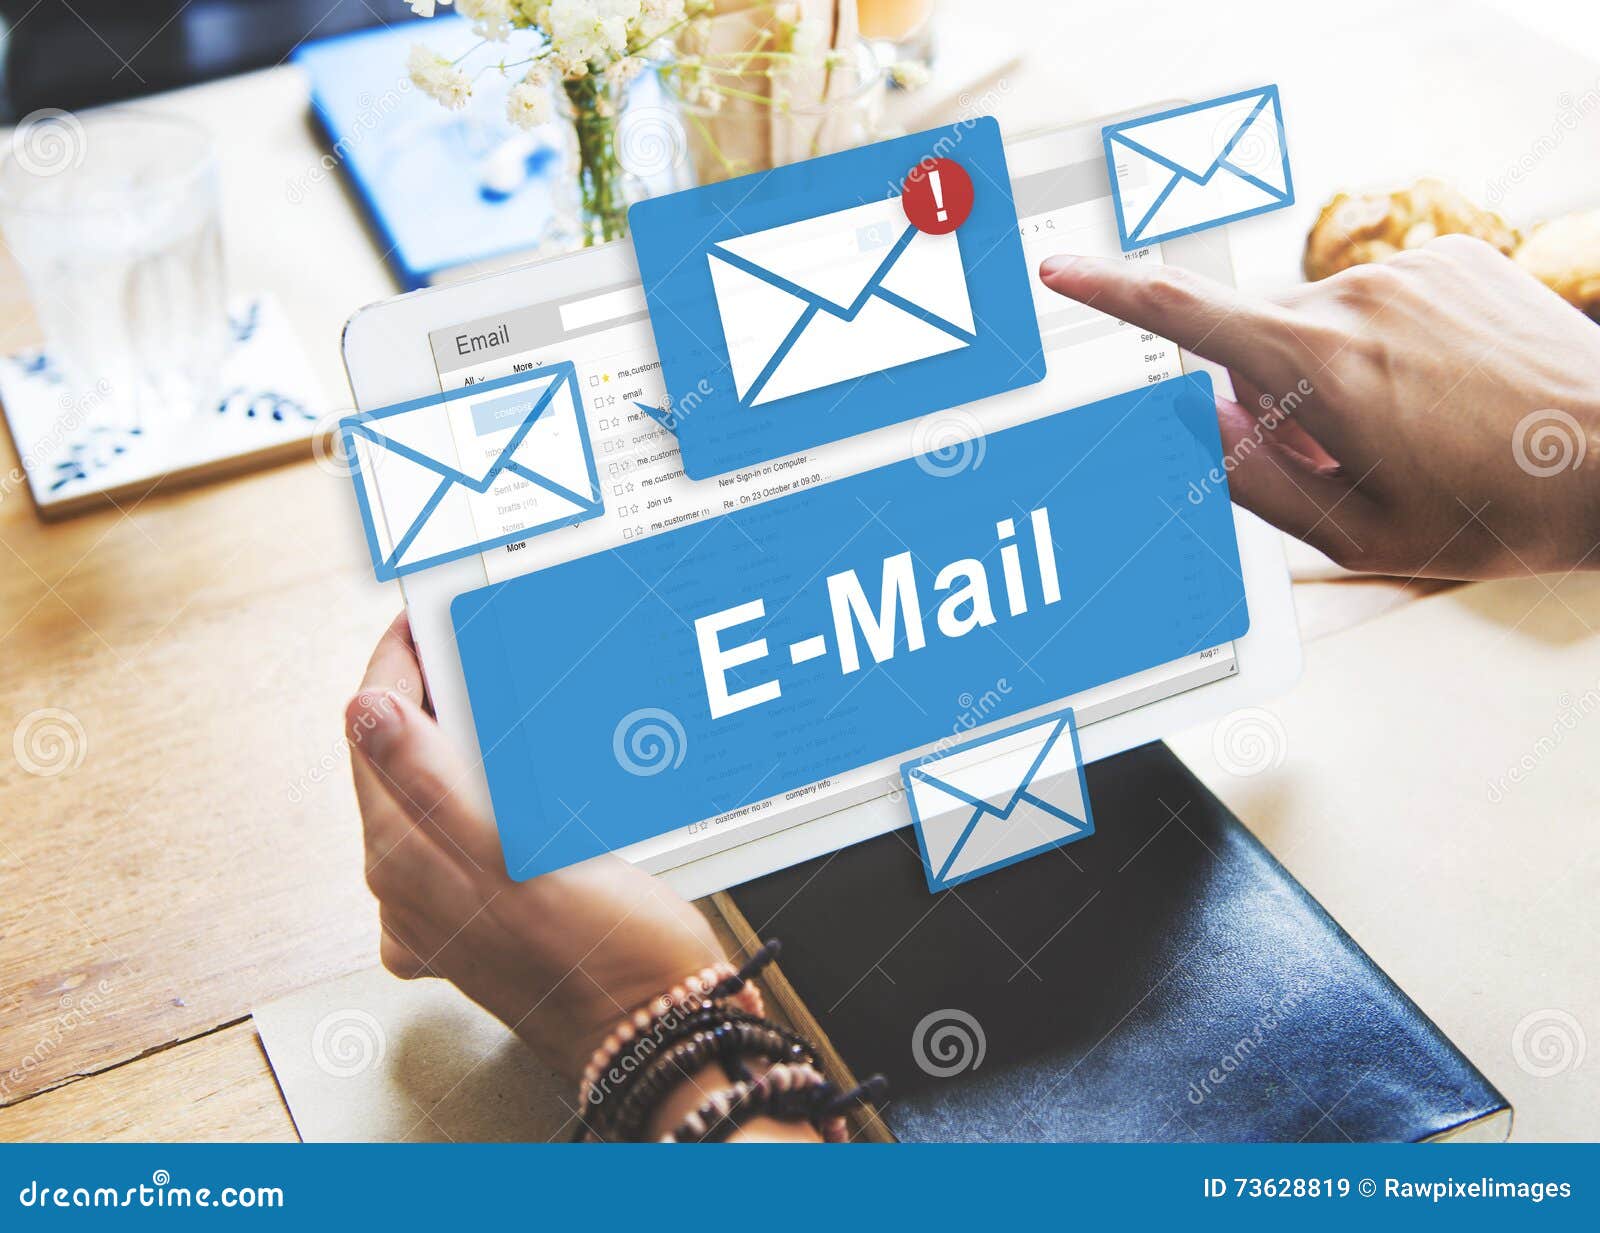 email inbox electronic communication graphics concept